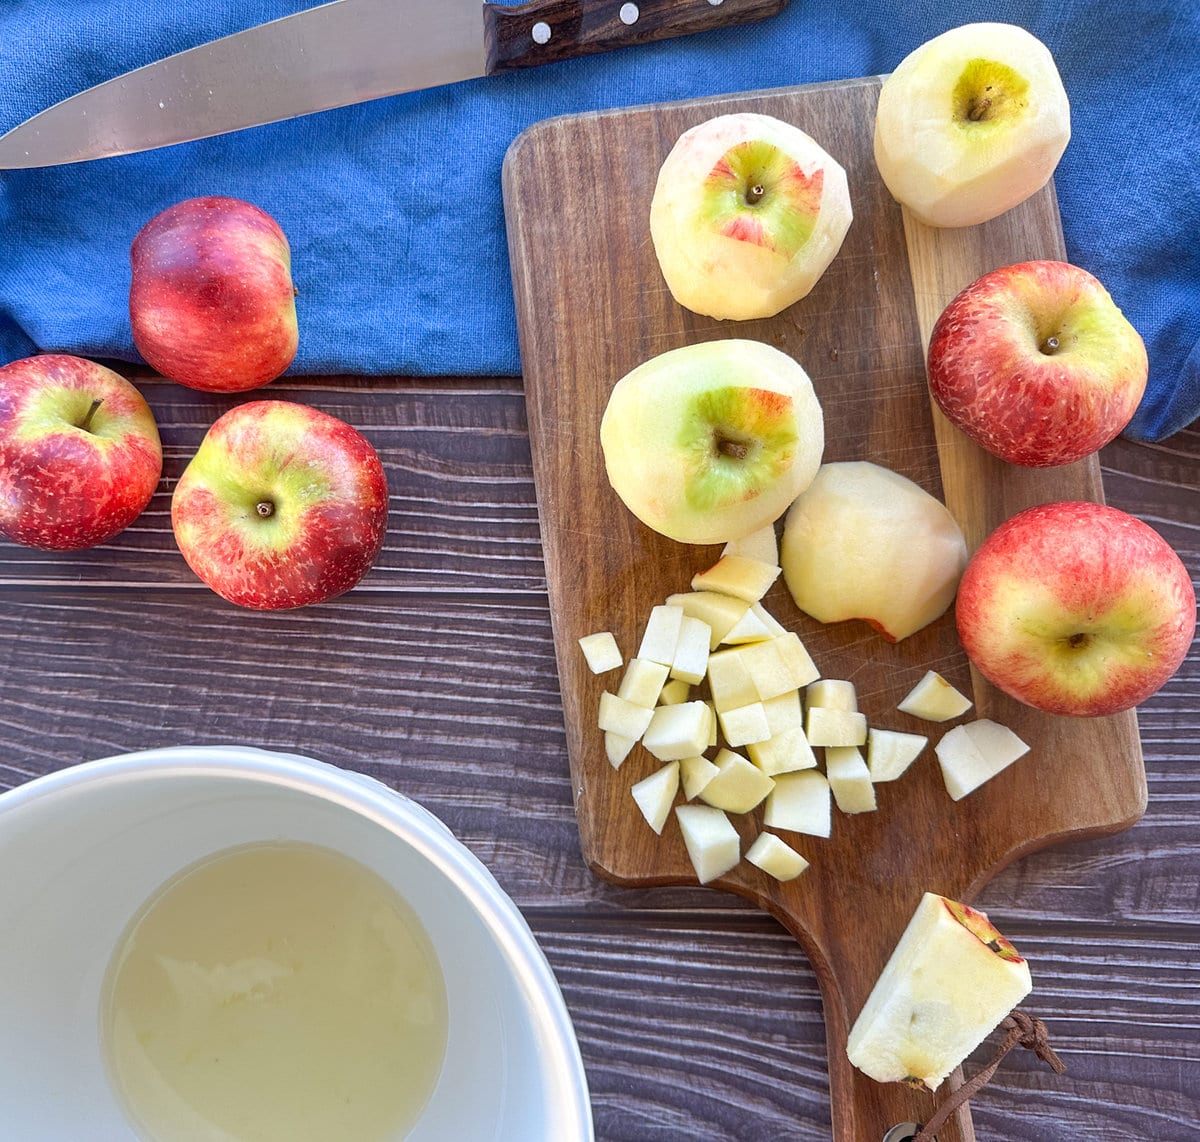 Diced apples and lemon juice for apple pie filling, whole apples, a wooden chopping board and sharp knife